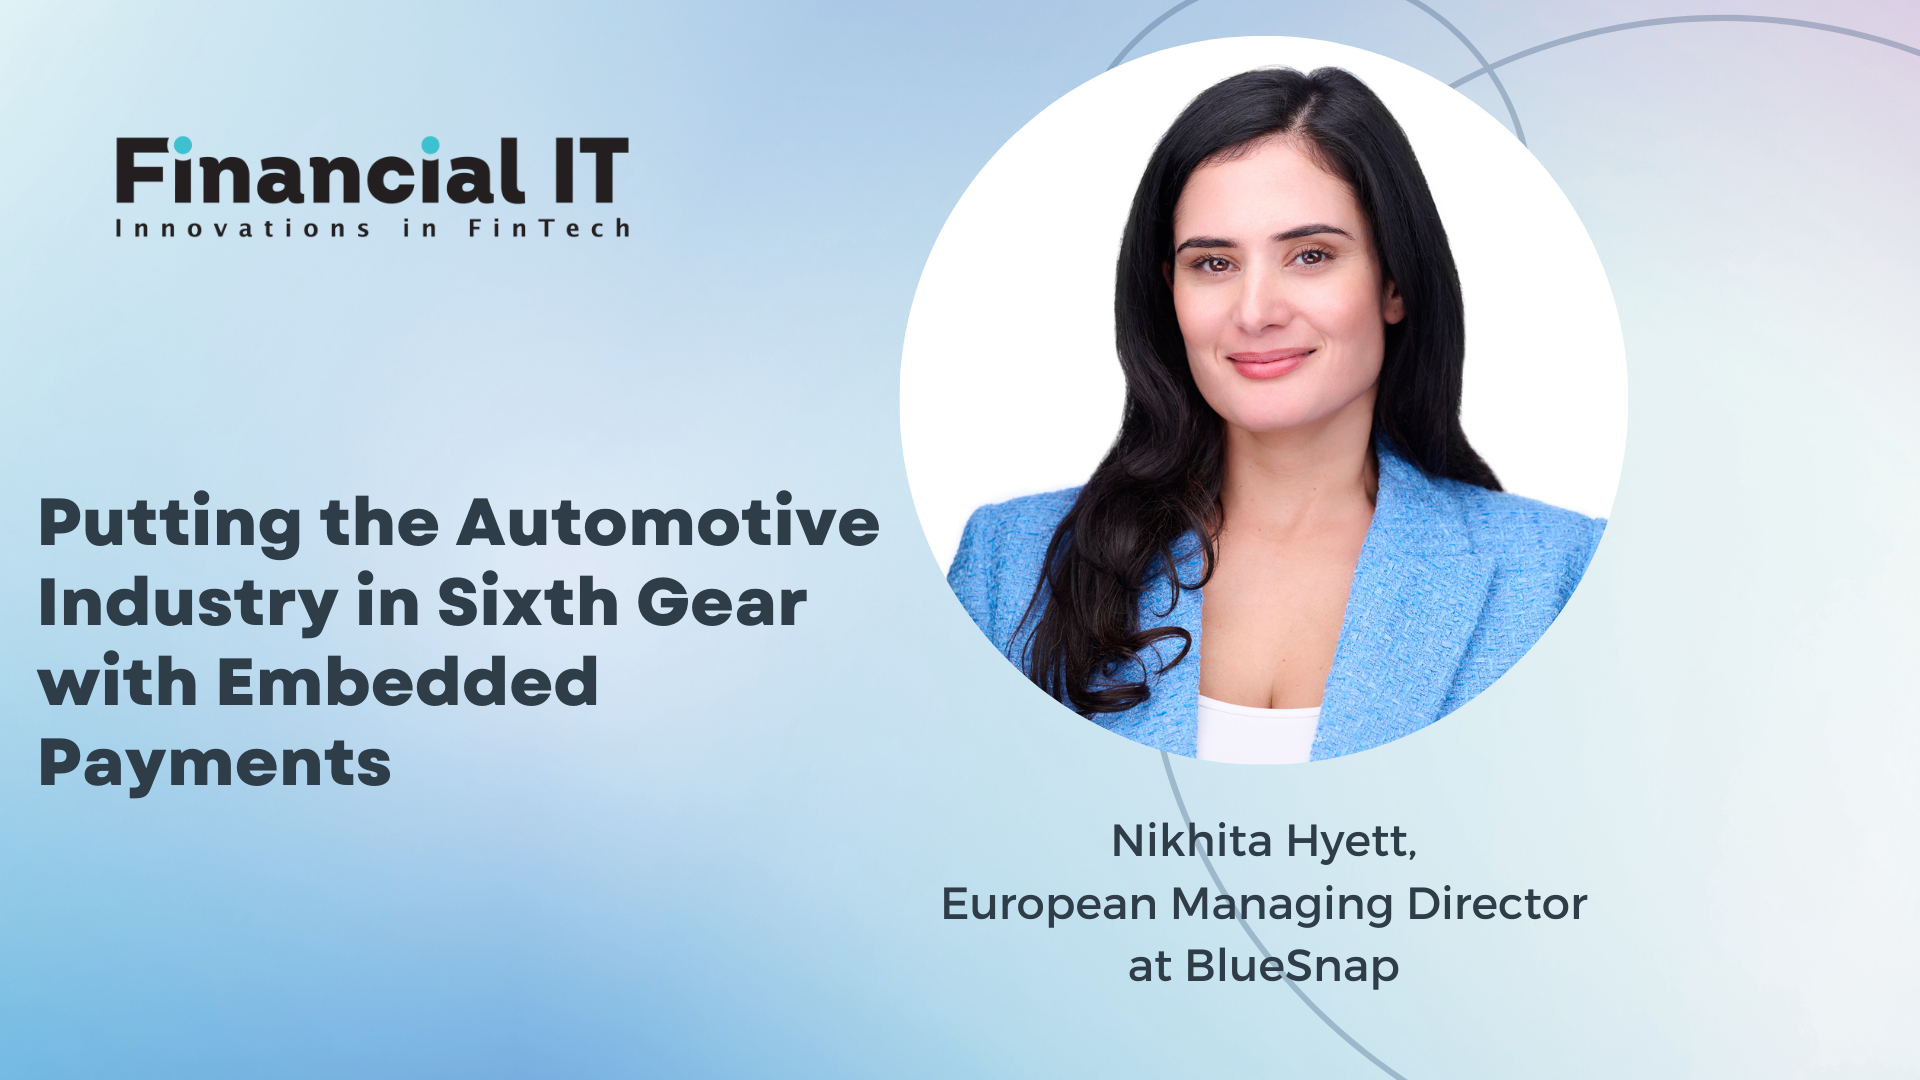 Putting the Automotive Industry in Sixth Gear with Embedded Payments